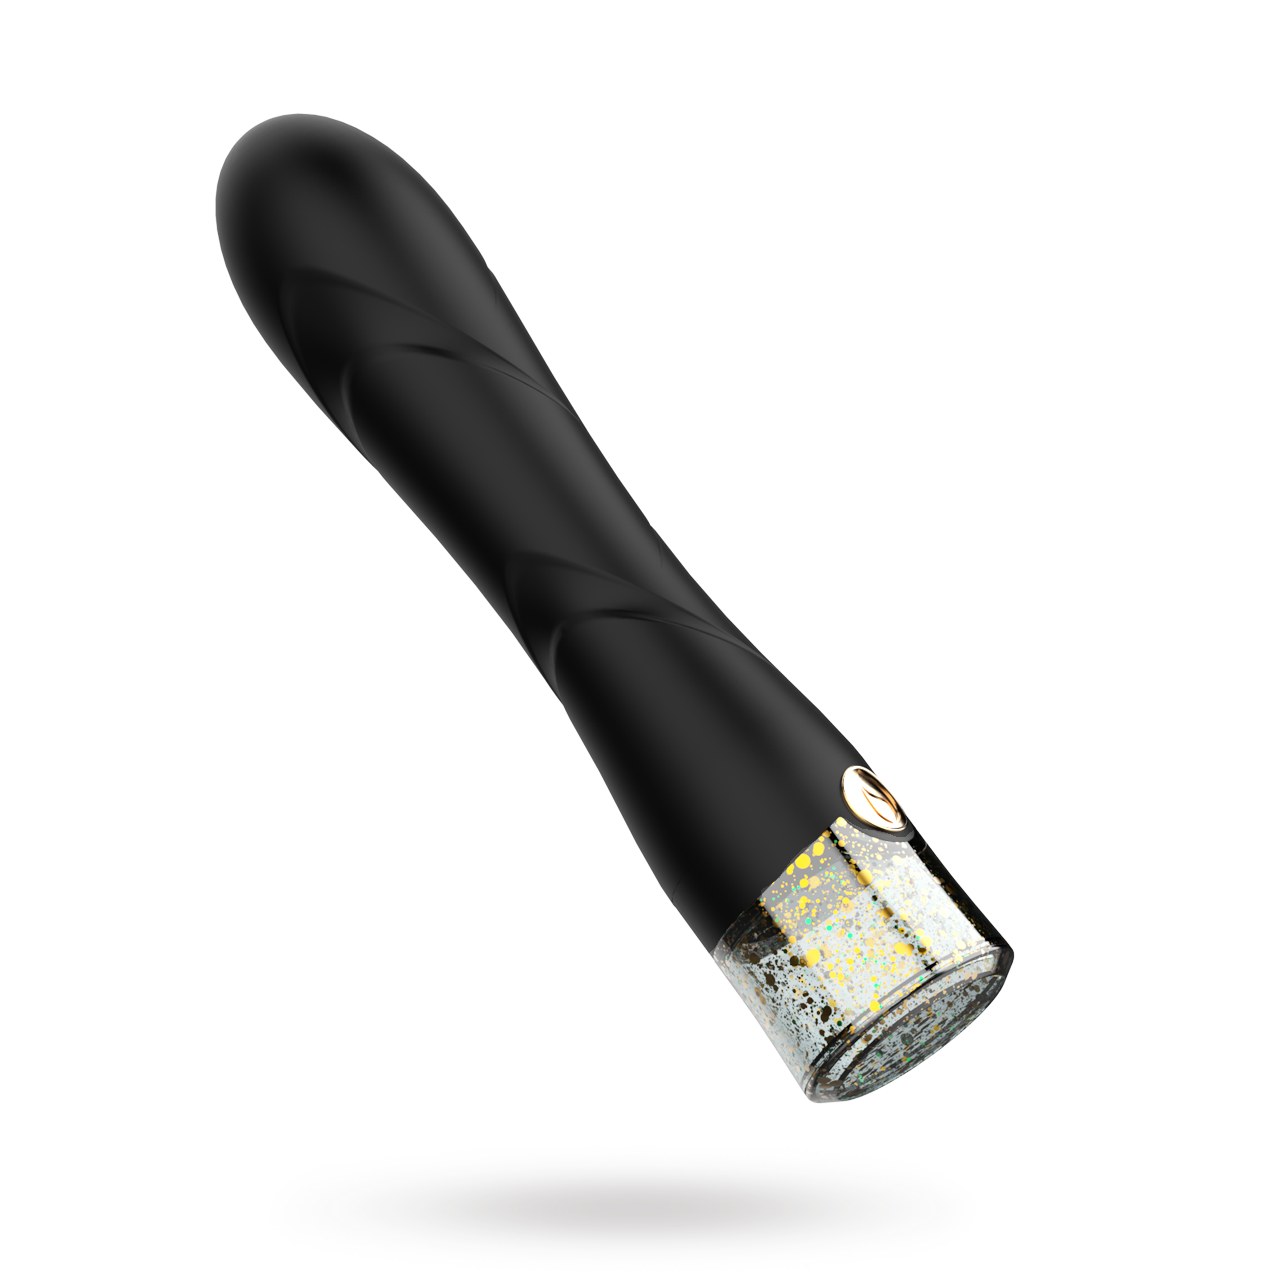 The Bling Bling Vibrator with Gold Flakes & LED Light